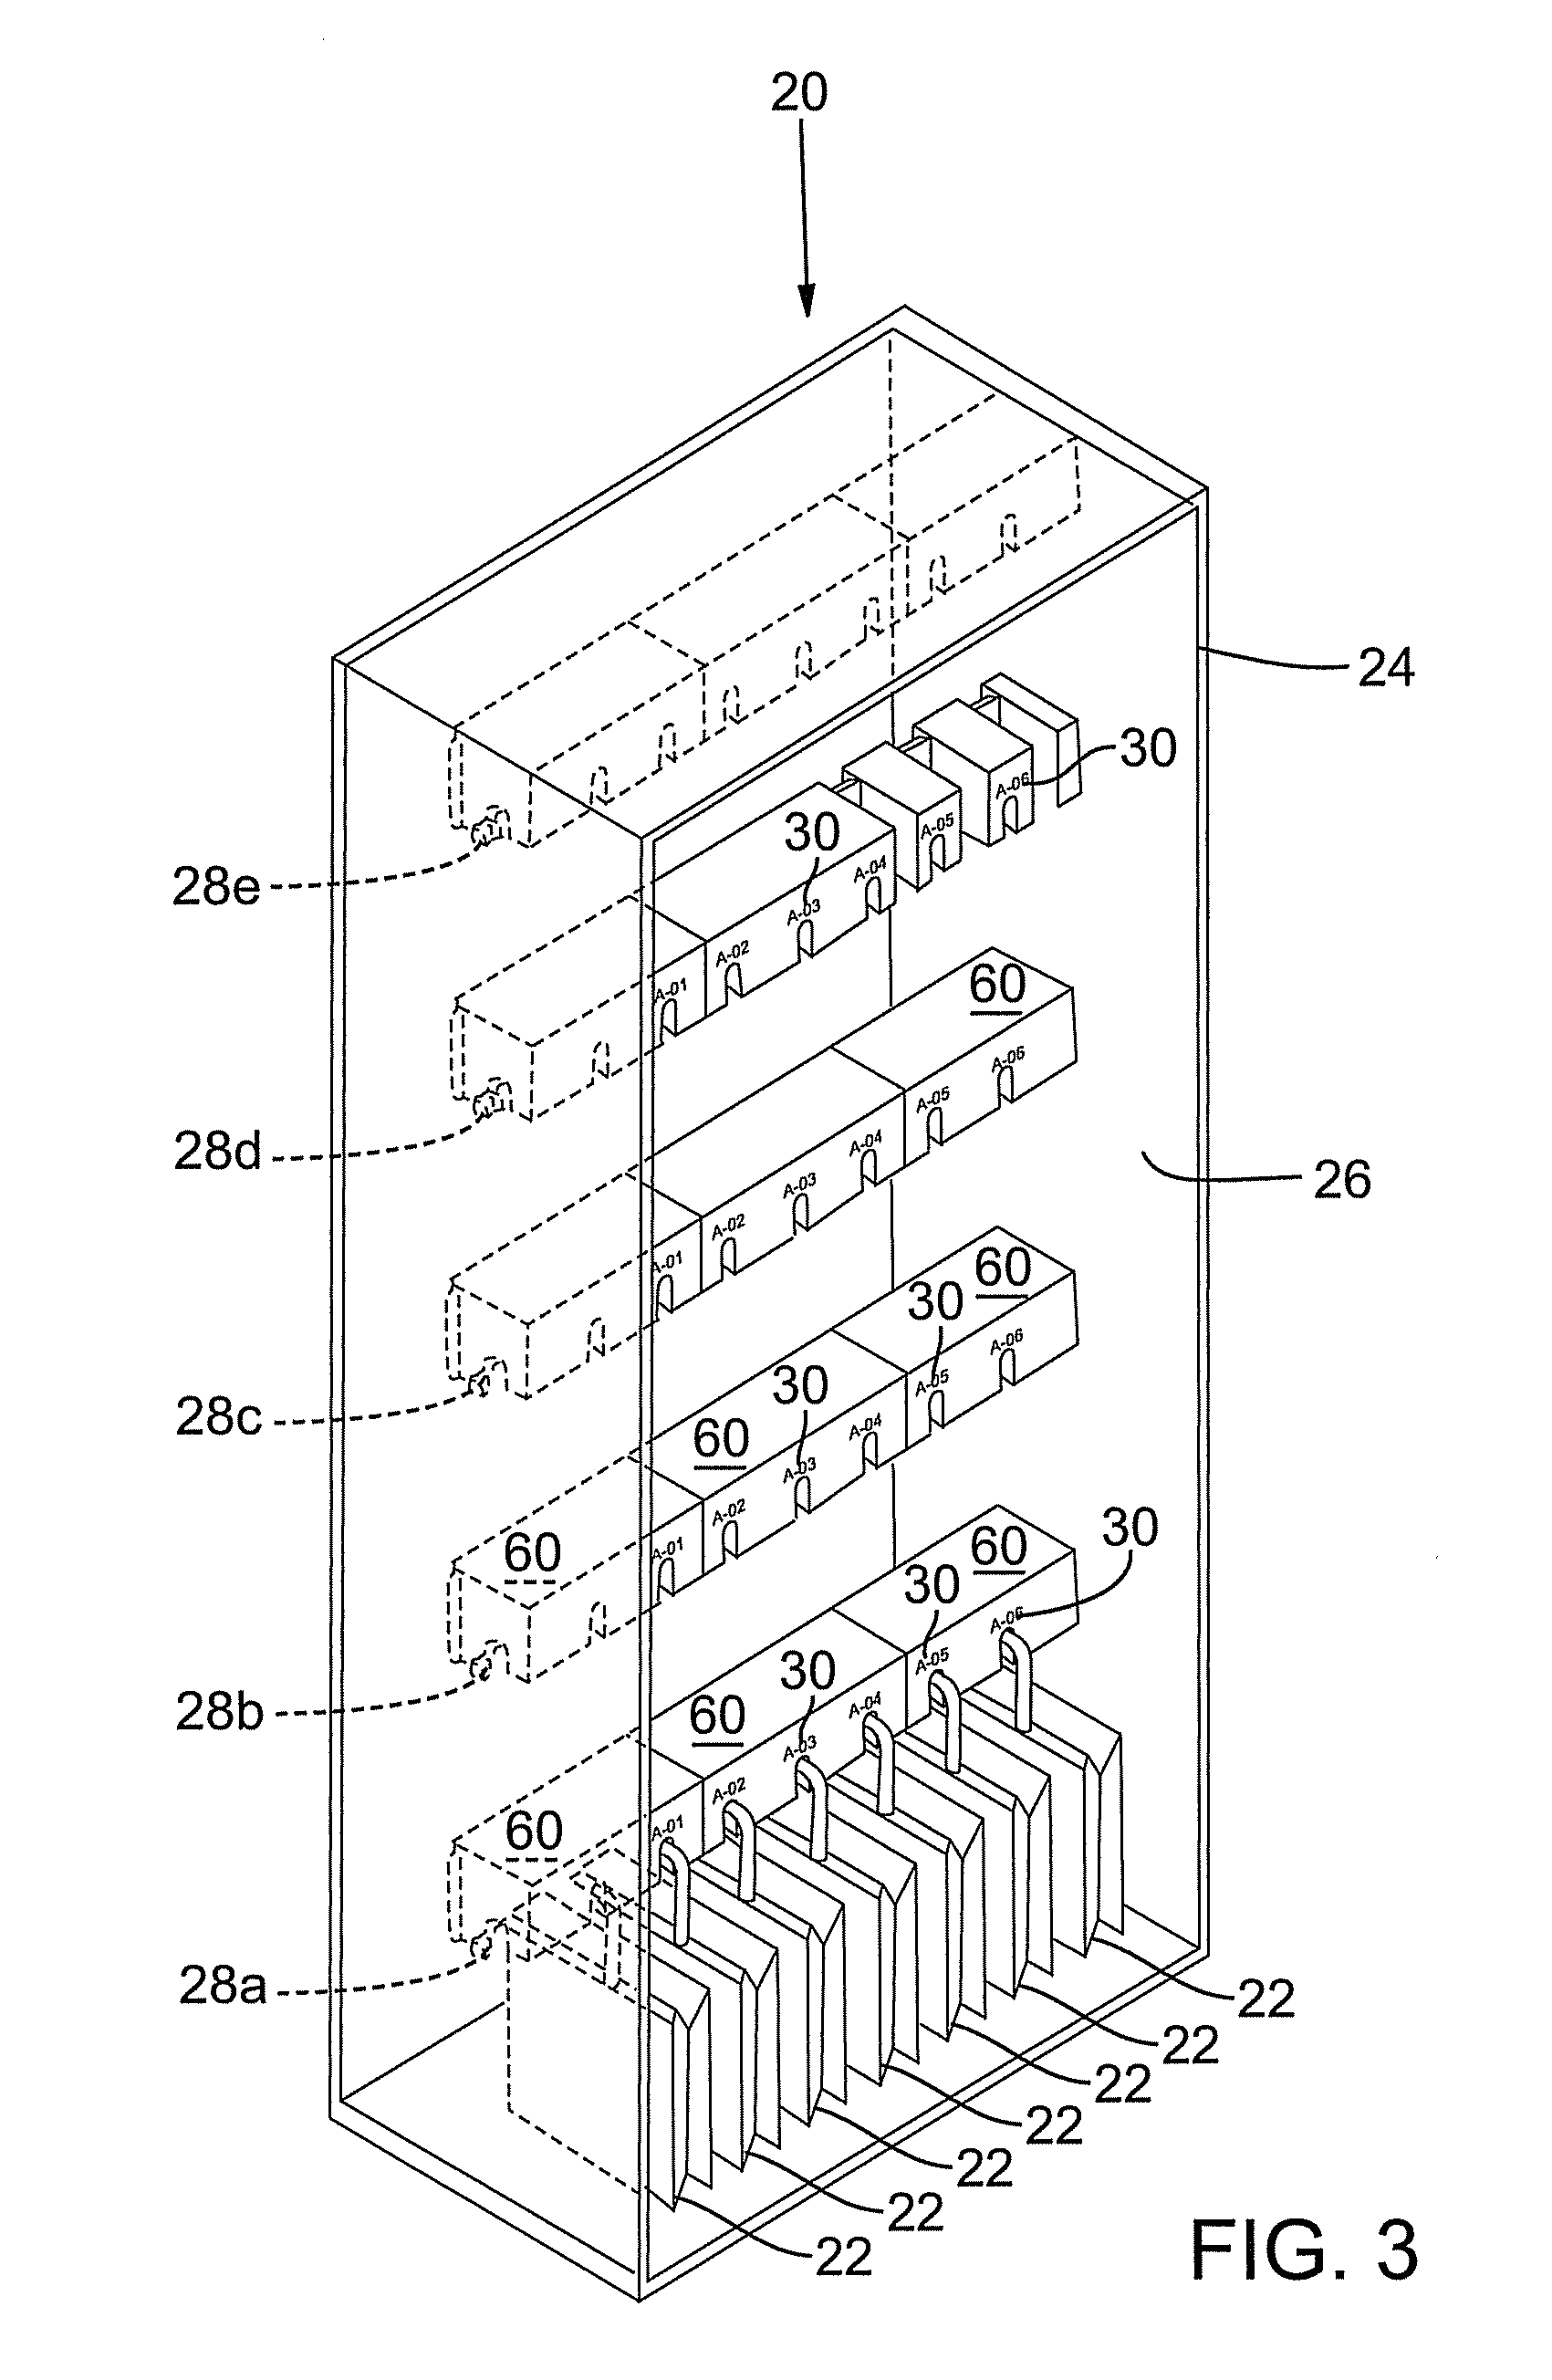 Suspended storage system for pharmacy